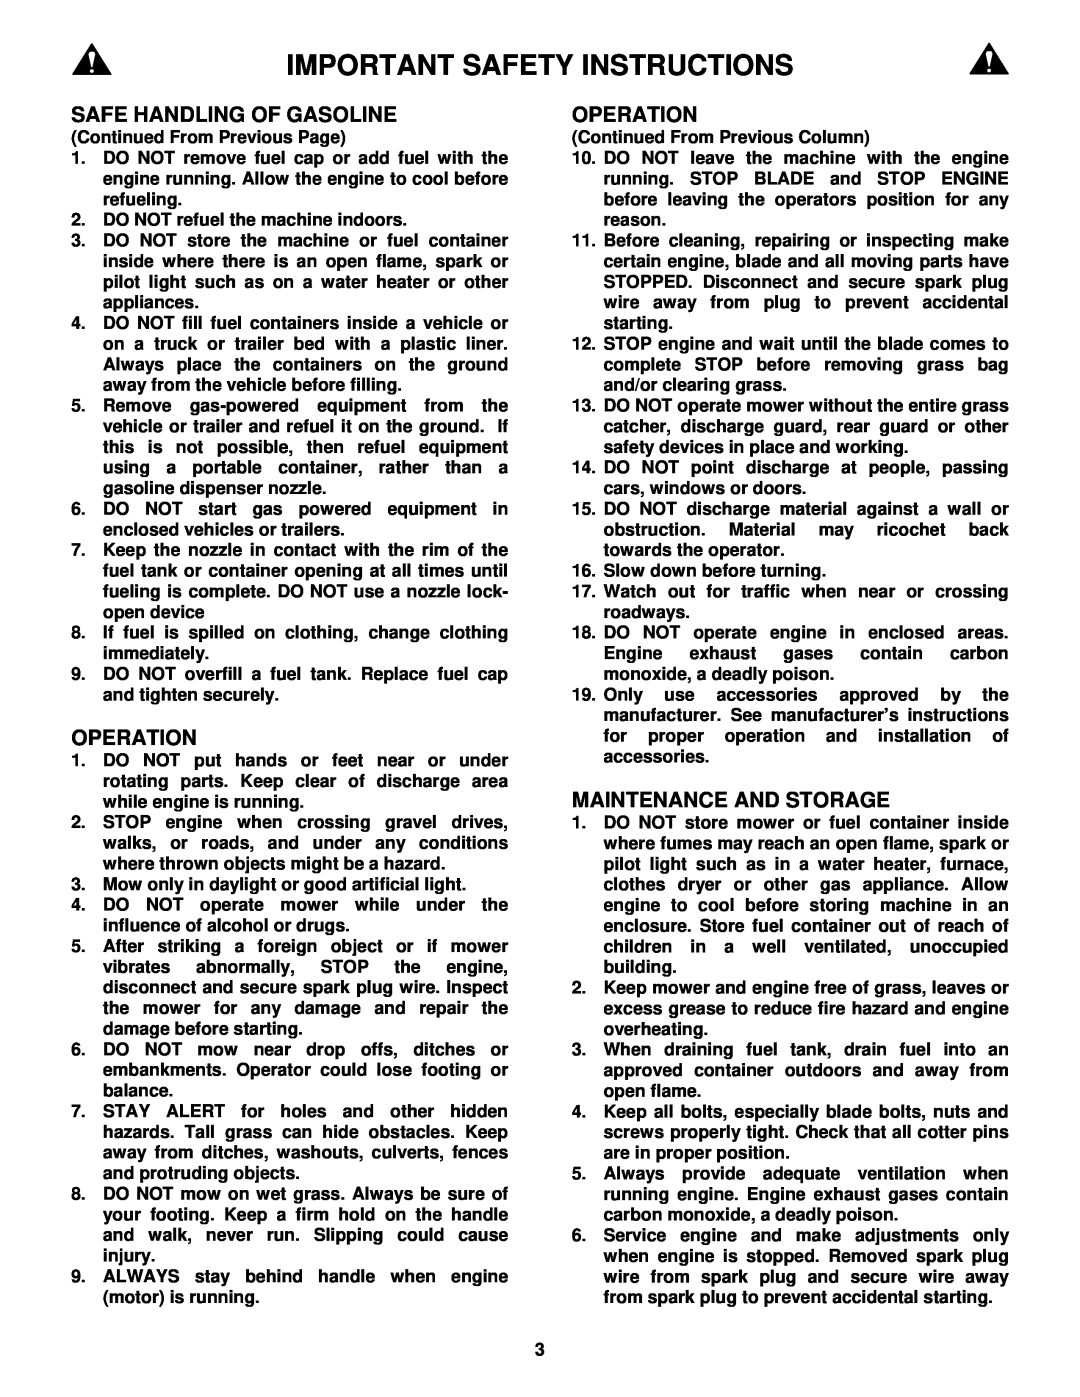 Snapper R1962519B important safety instructions Important Safety Instructions, Continued From Previous Page 